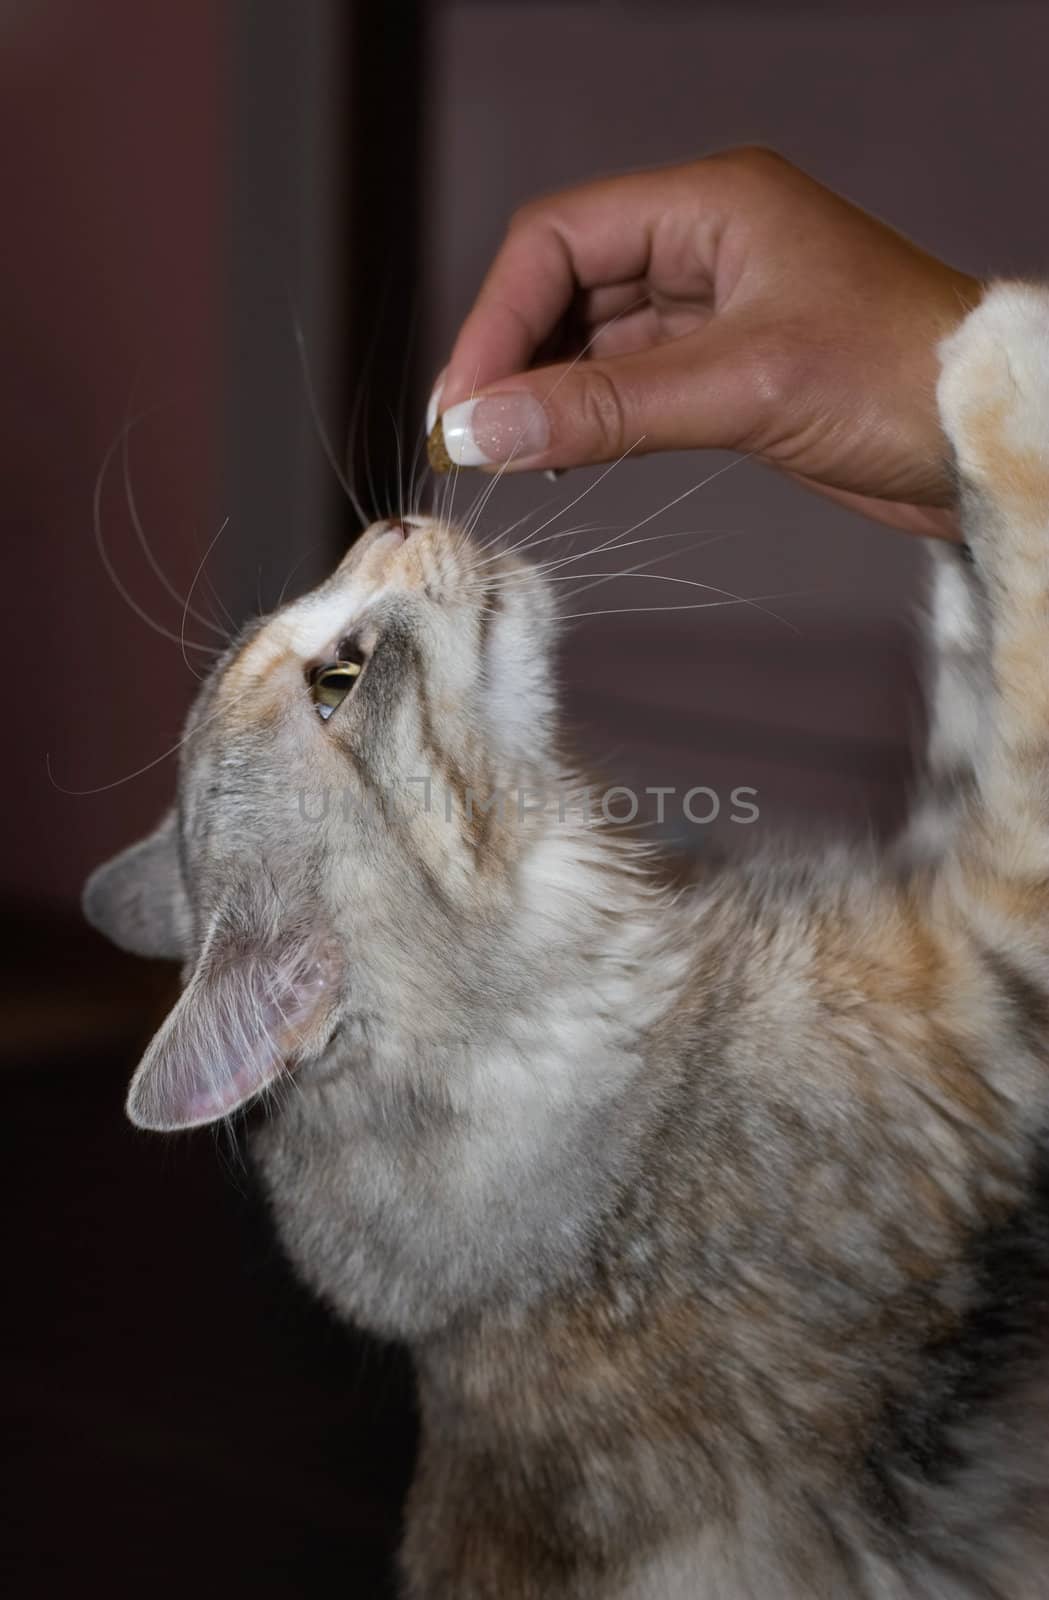 eating cat tablet from hand